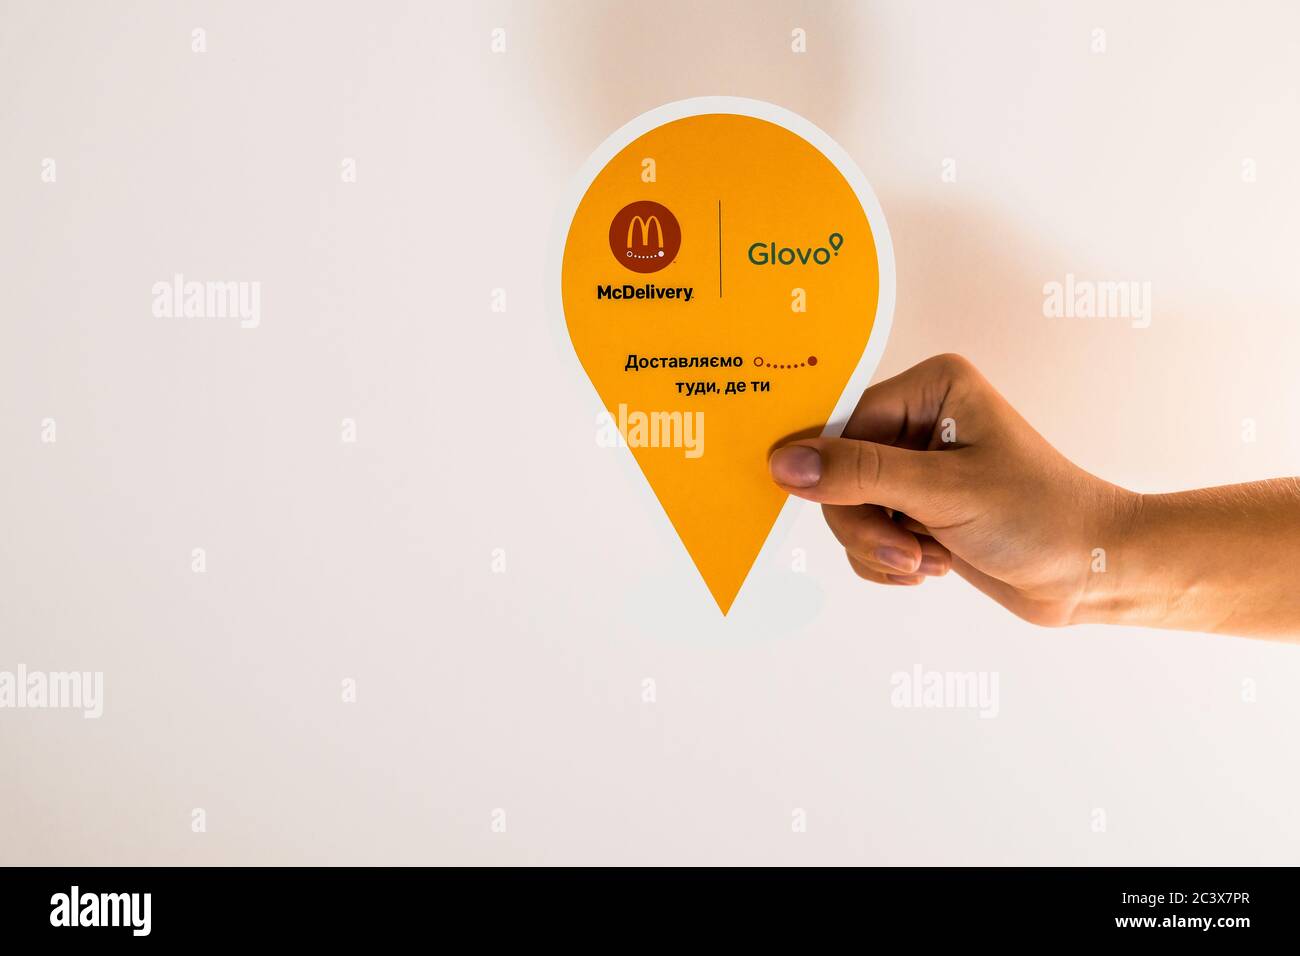 Lviv / Ukraine - April 2020: Glovo delivery service label in a hand against the white wall. Ordering takeaway food from home during social isolation. Stock Photo